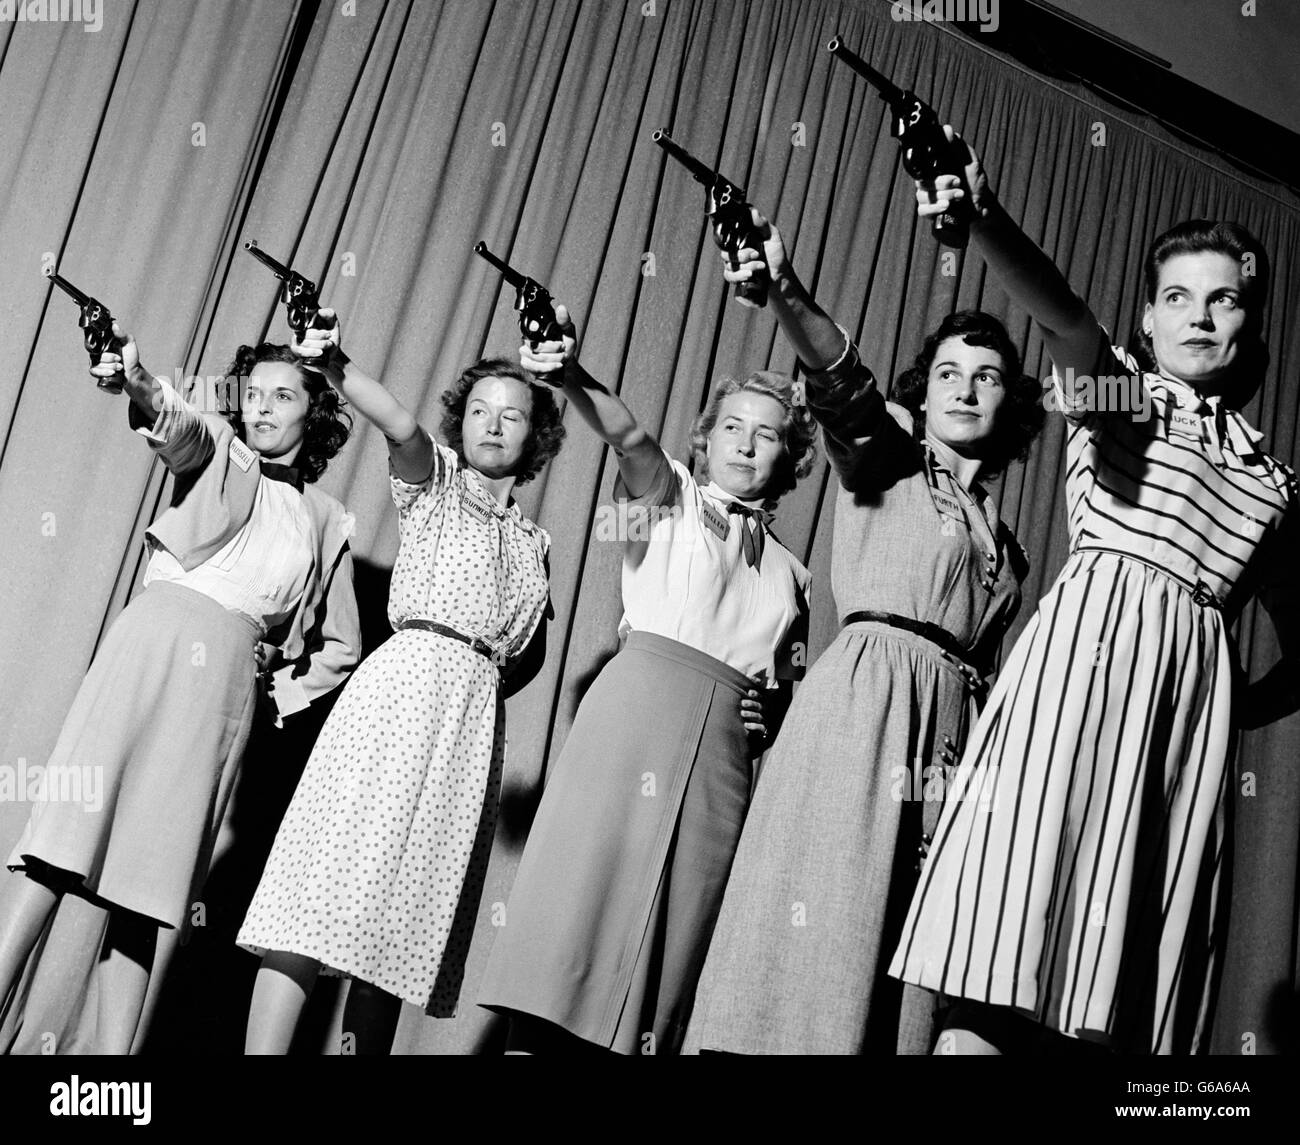 1940s GROUP FIVE WOMEN IN A LINE AIMING PISTOLS Stock Photo